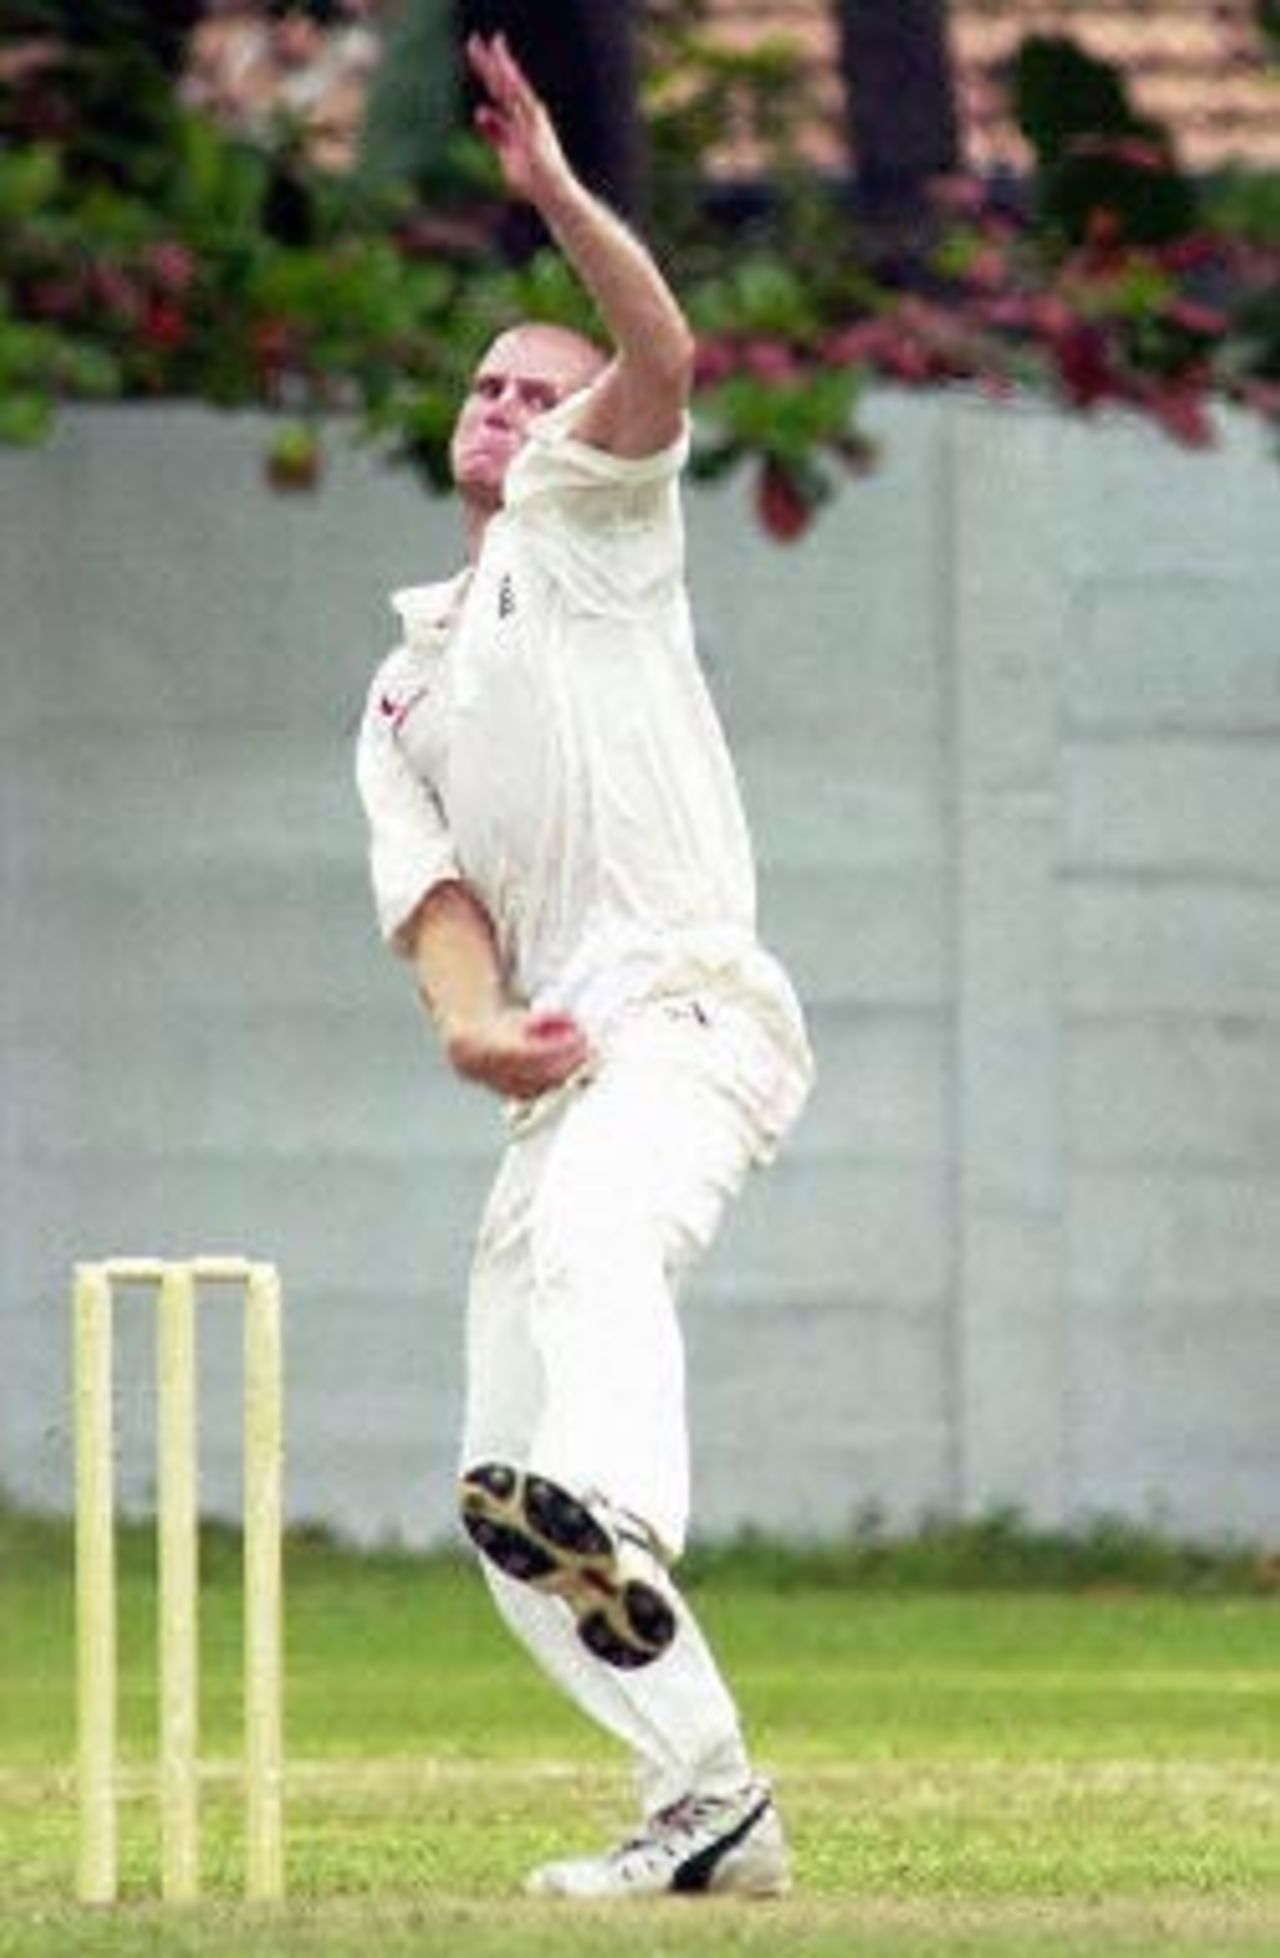 England bowler Matthew Hoggard prepares to deliver against a Sri Lanka Board XI batsman in the first inning of the first day of a four-day cricket match, 15 February 2001 in Matara, southern Sri Lanka